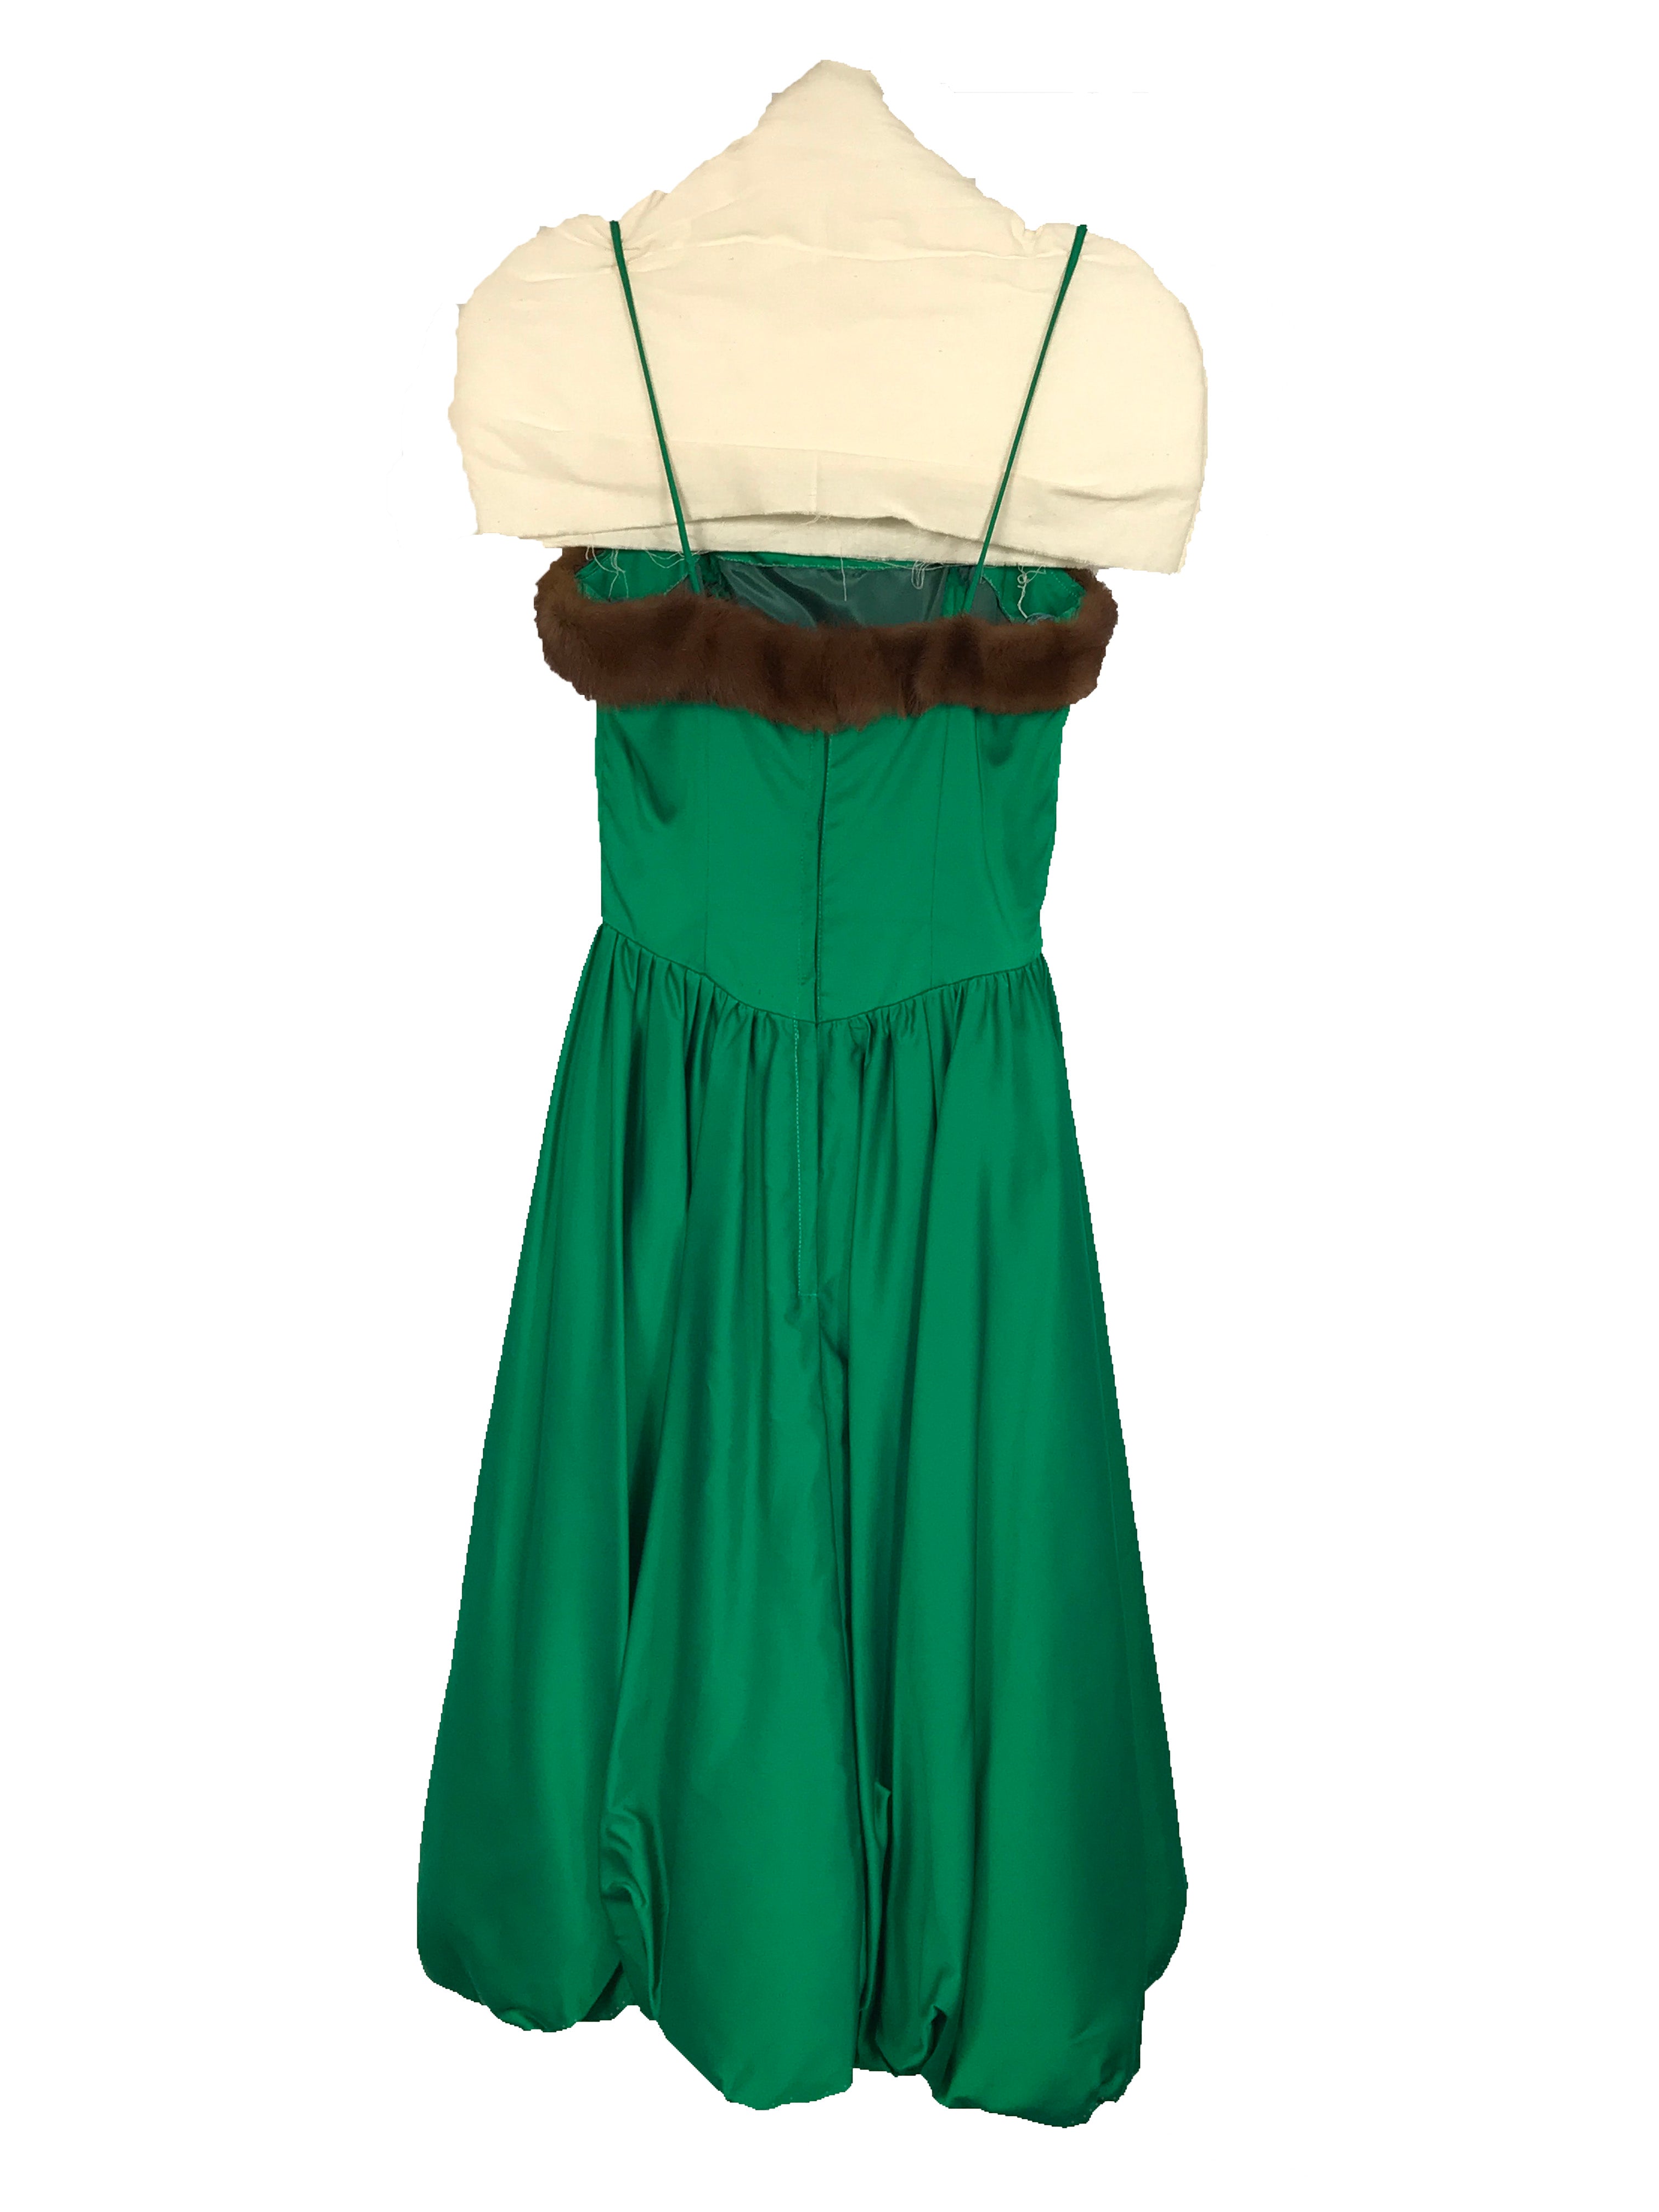 Vintage Mitzi Morgan Exclusively Neusteters Green Satin Evening Gown with Fur Trim Women's Size 7